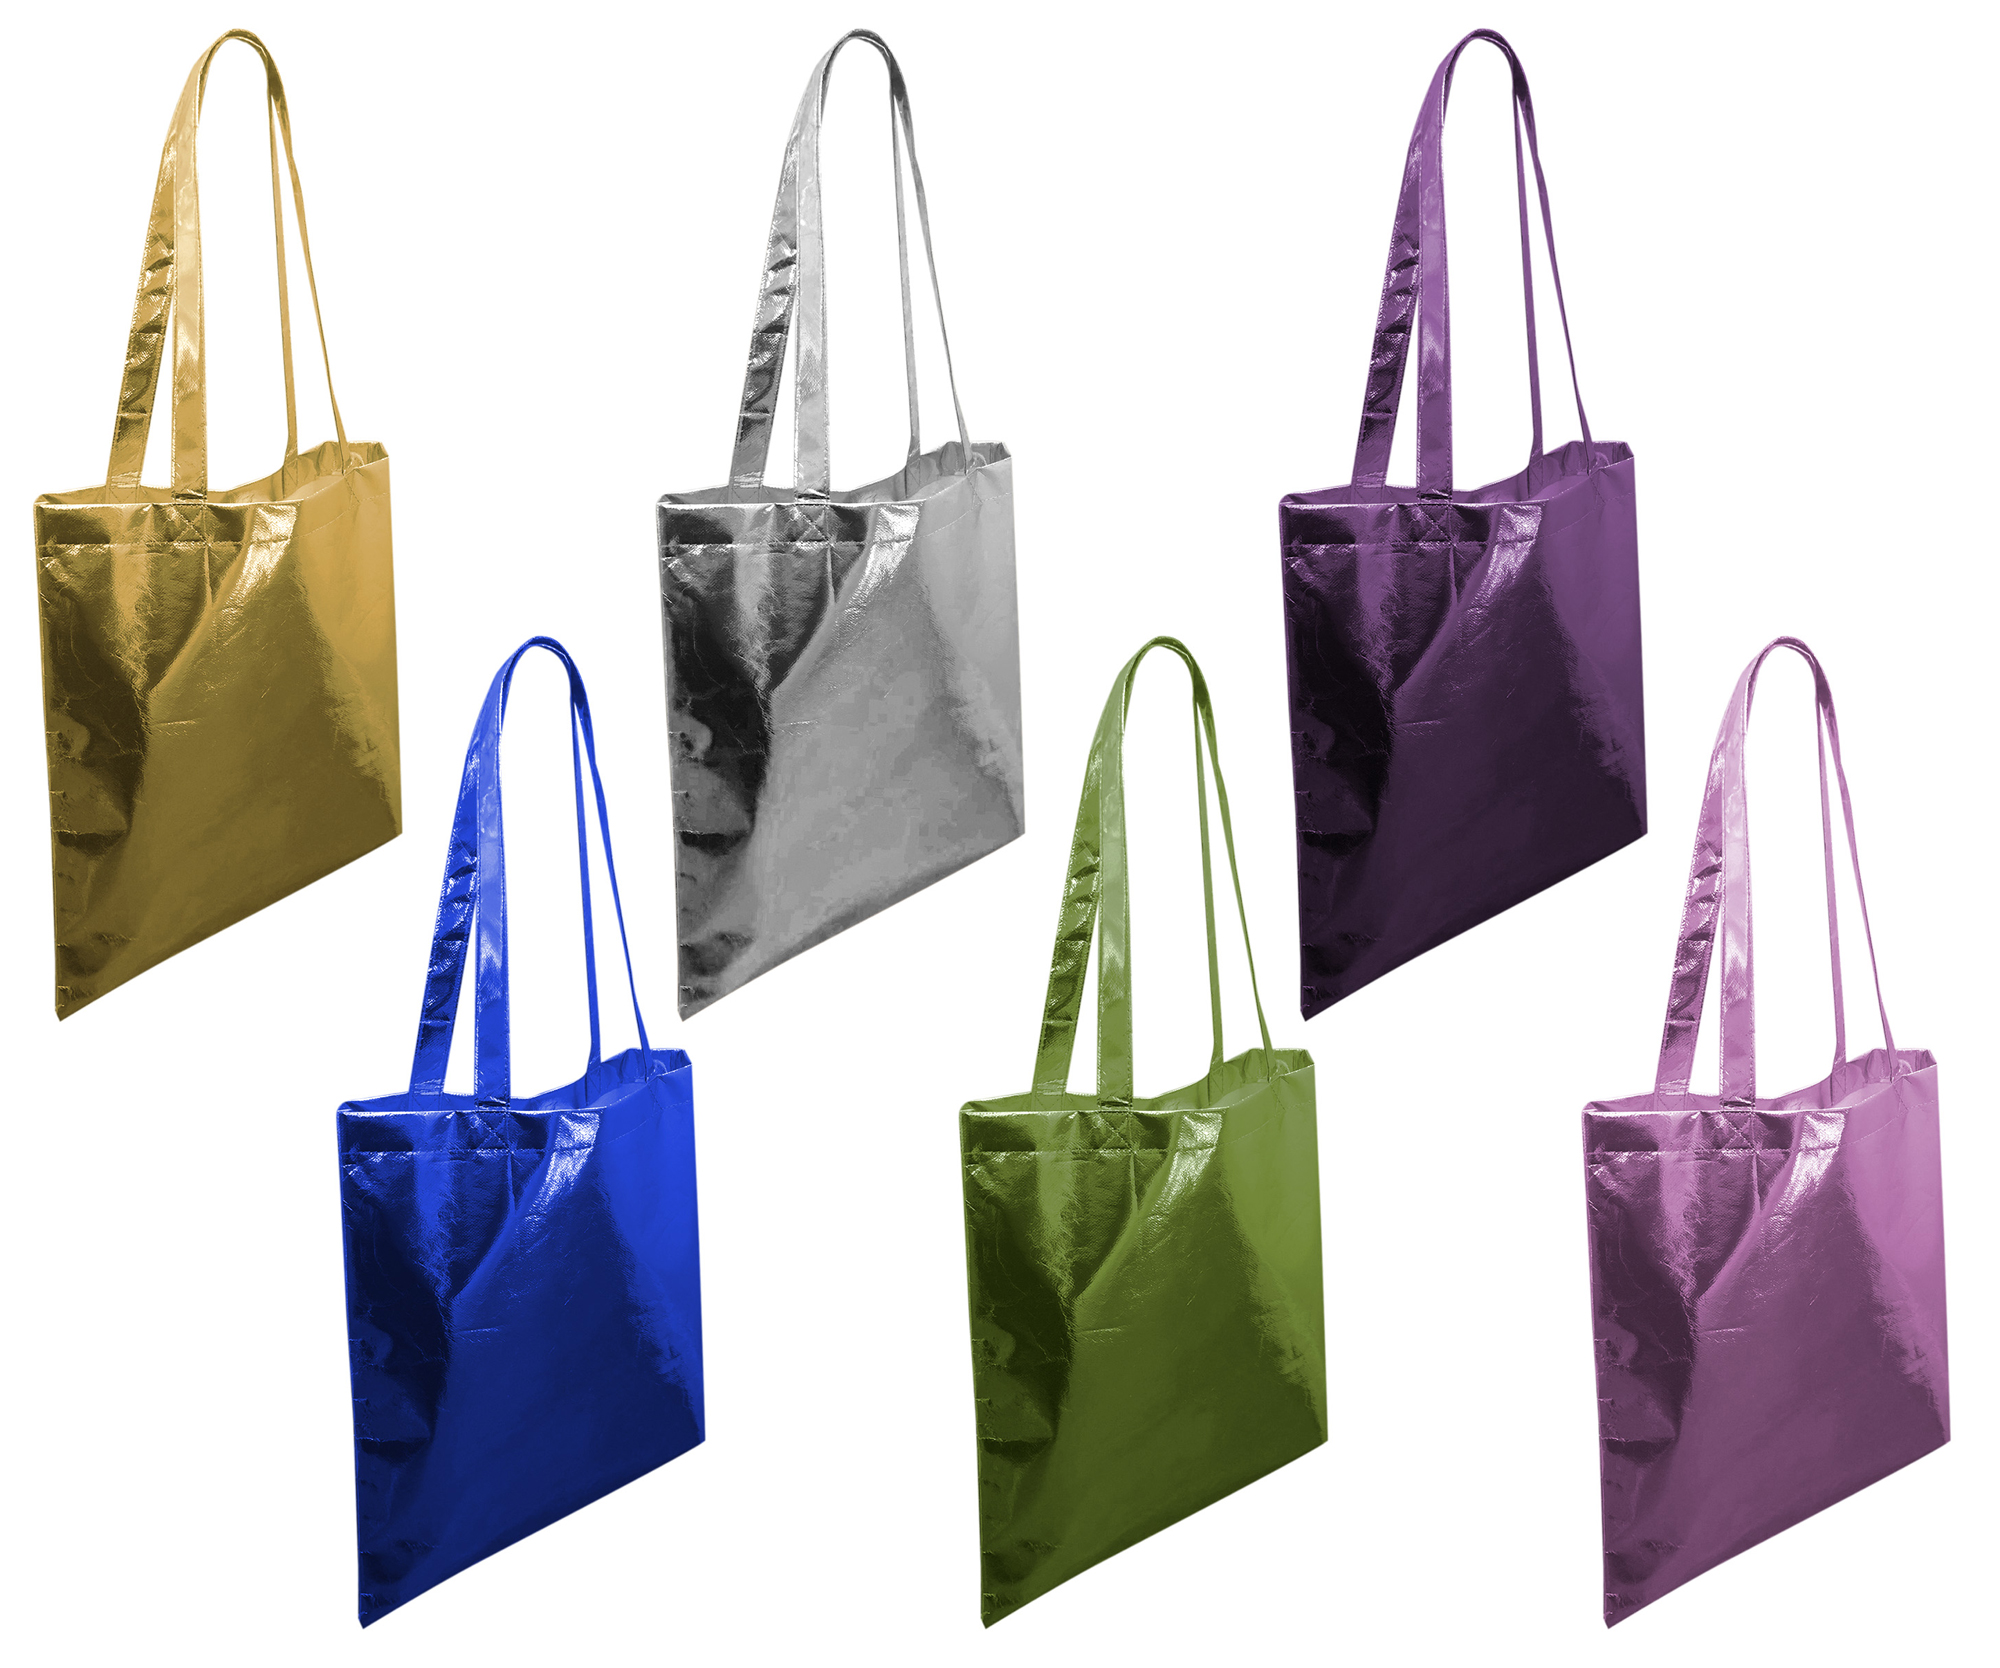 ''Metallic Patent Leather Tote Bags - 14'''' x 15'''' - Choose Your Color(s)''